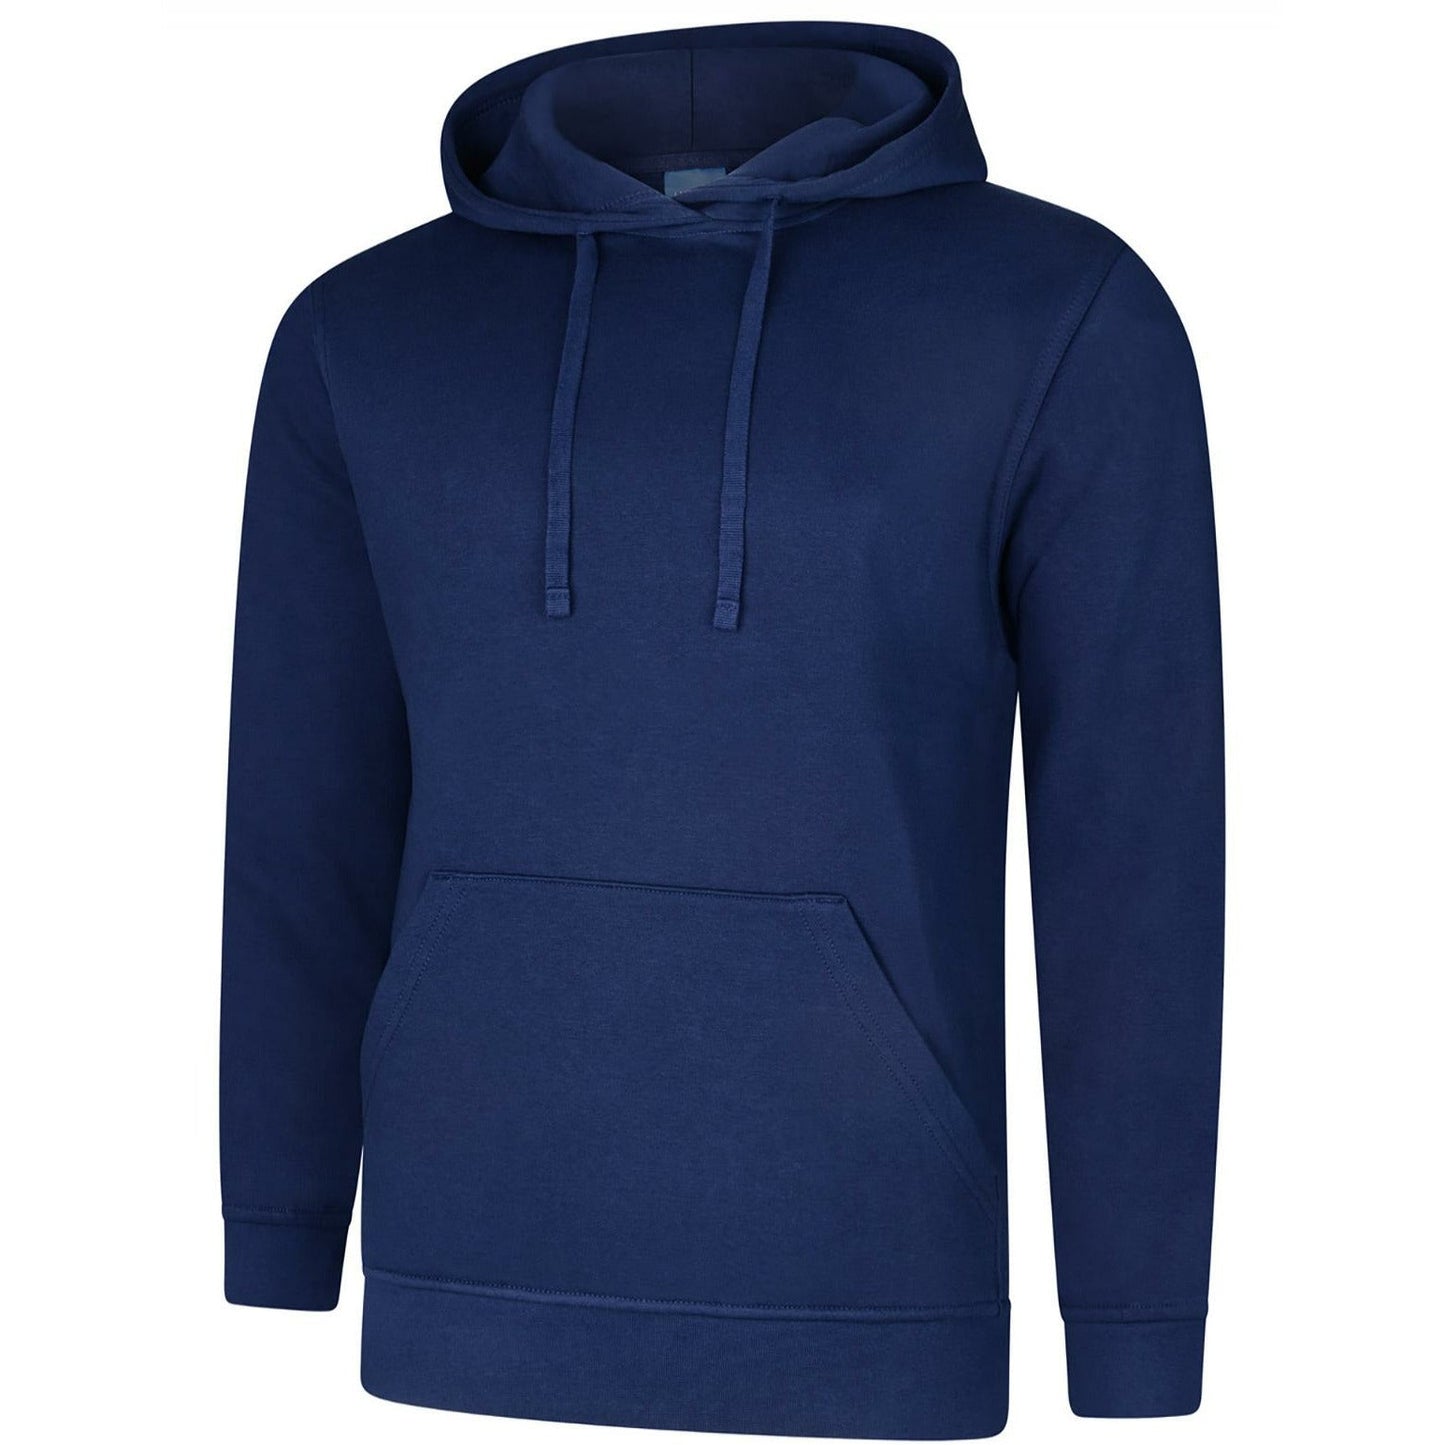 Deluxe Hooded Sweatshirt (L - 2XL) French Navy